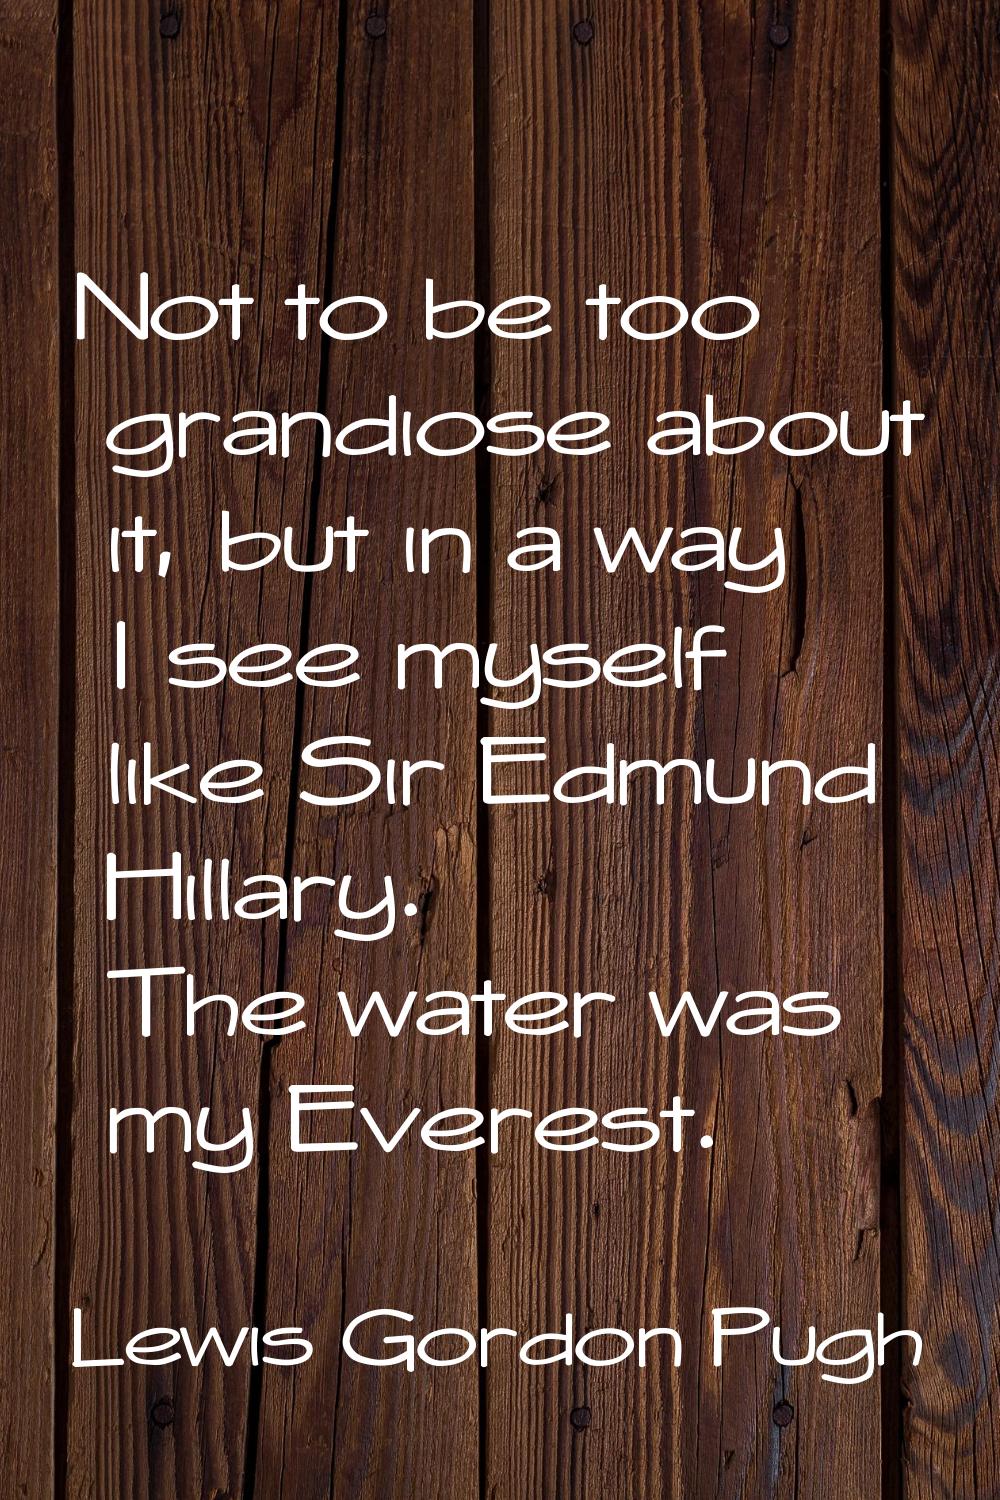 Not to be too grandiose about it, but in a way I see myself like Sir Edmund Hillary. The water was 